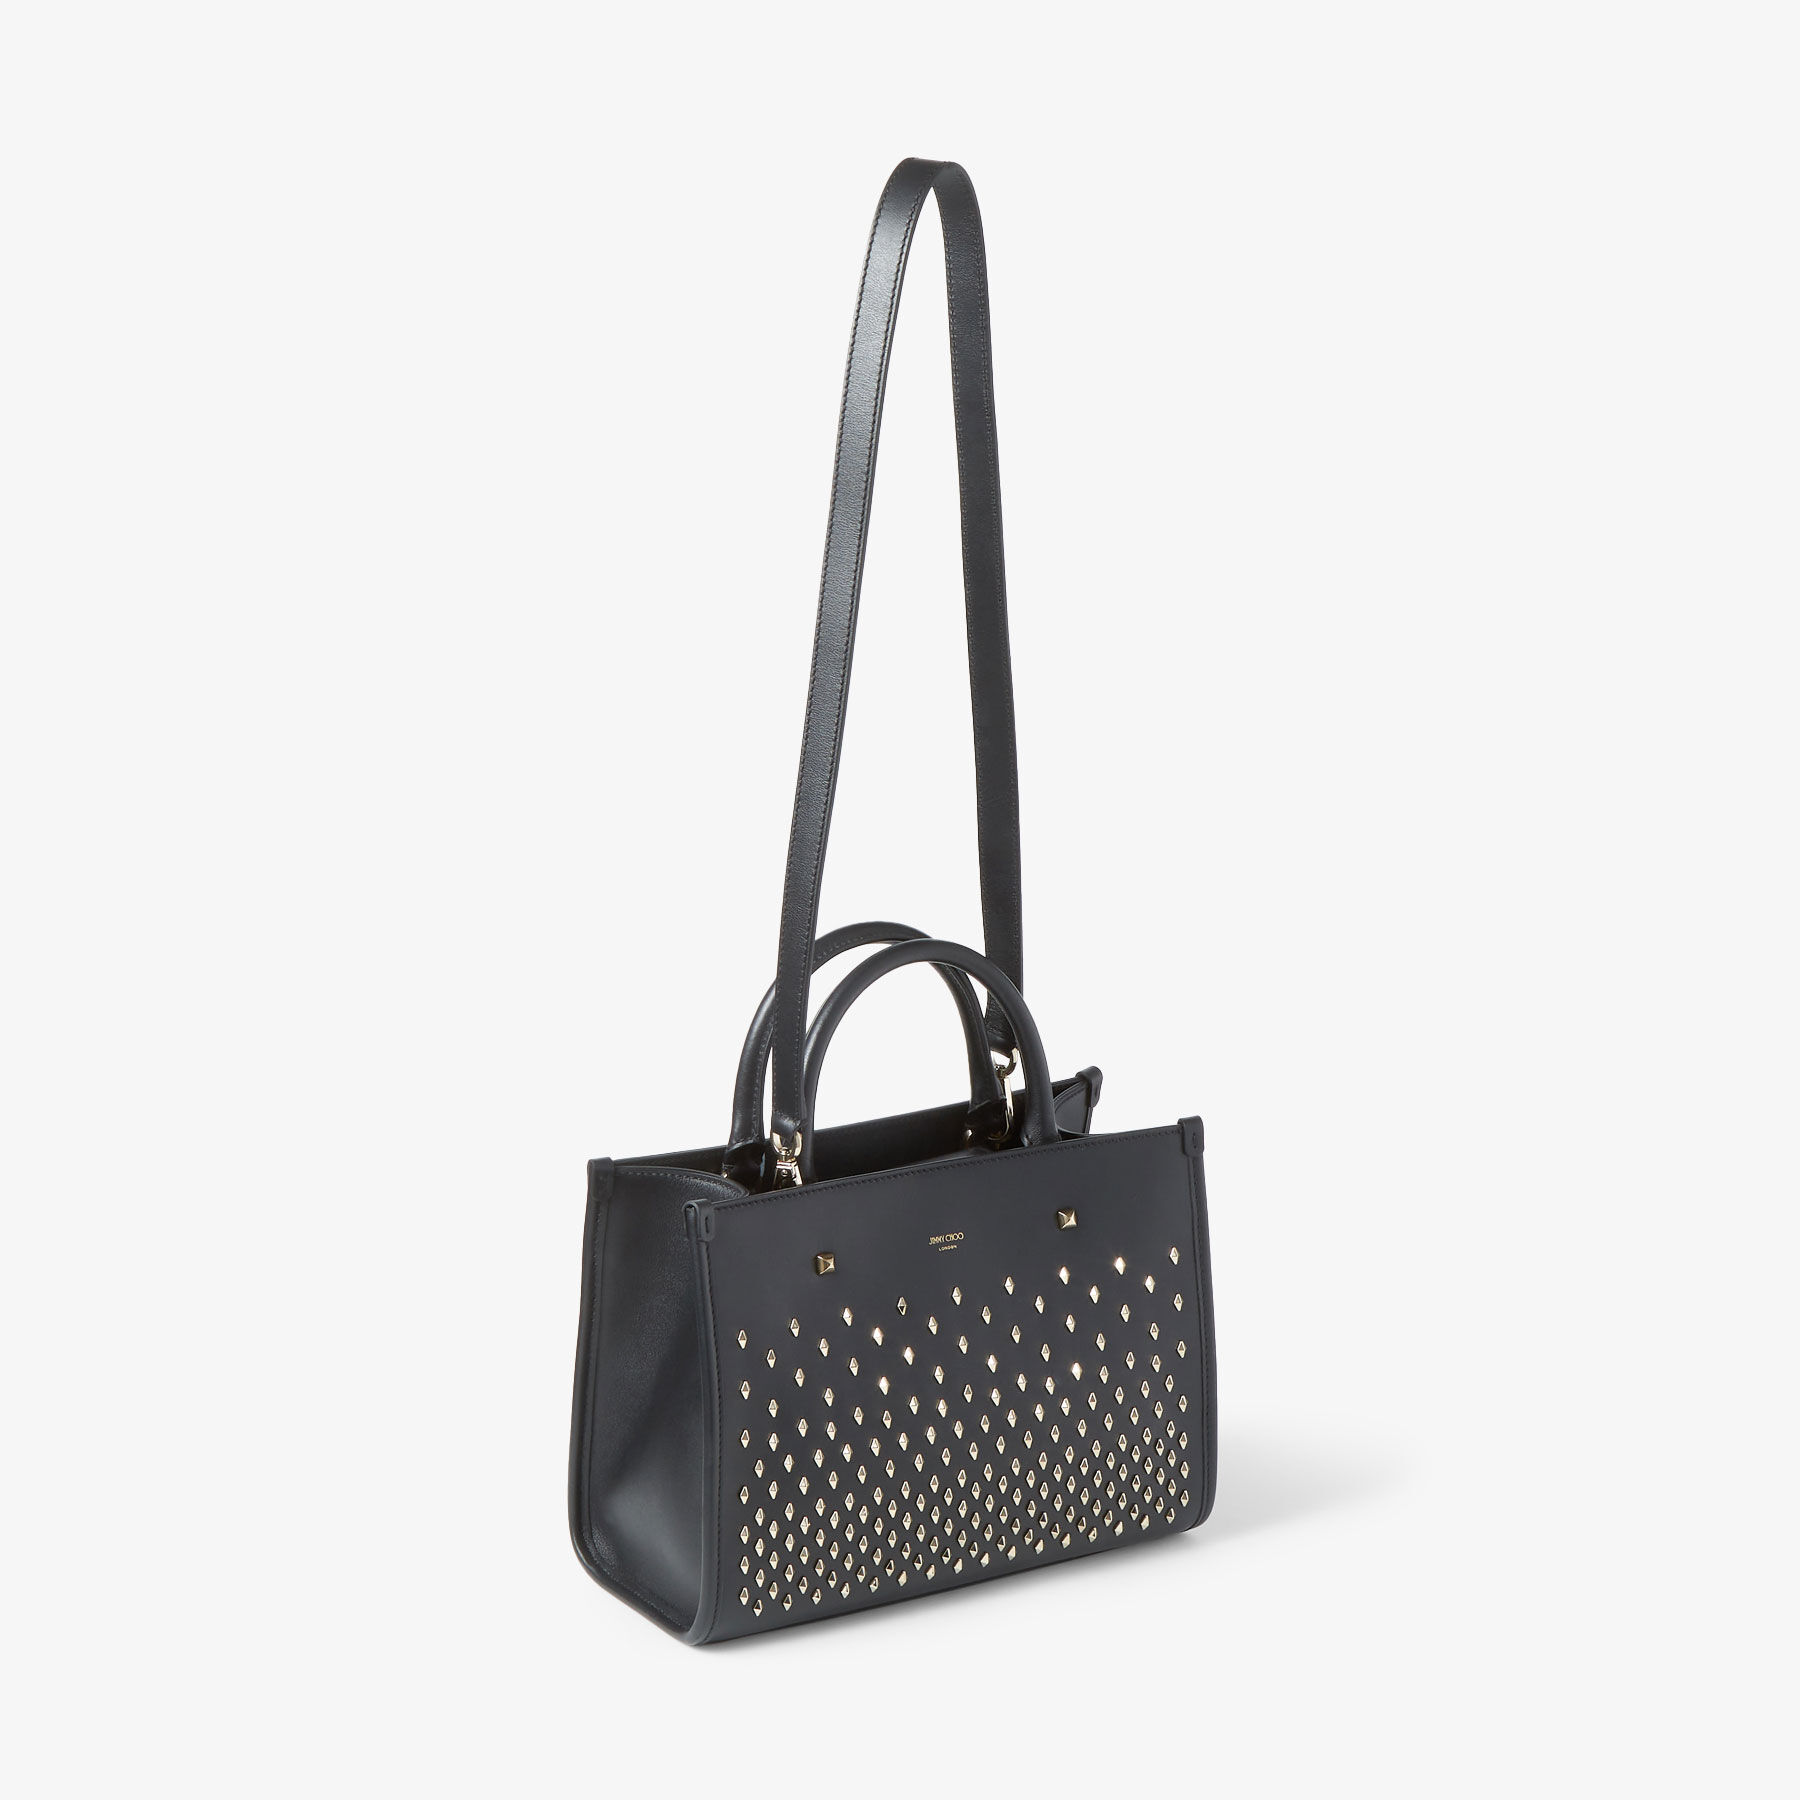 AVENUE S TOTE | Black Leather Tote Bag with Studs | Summer 